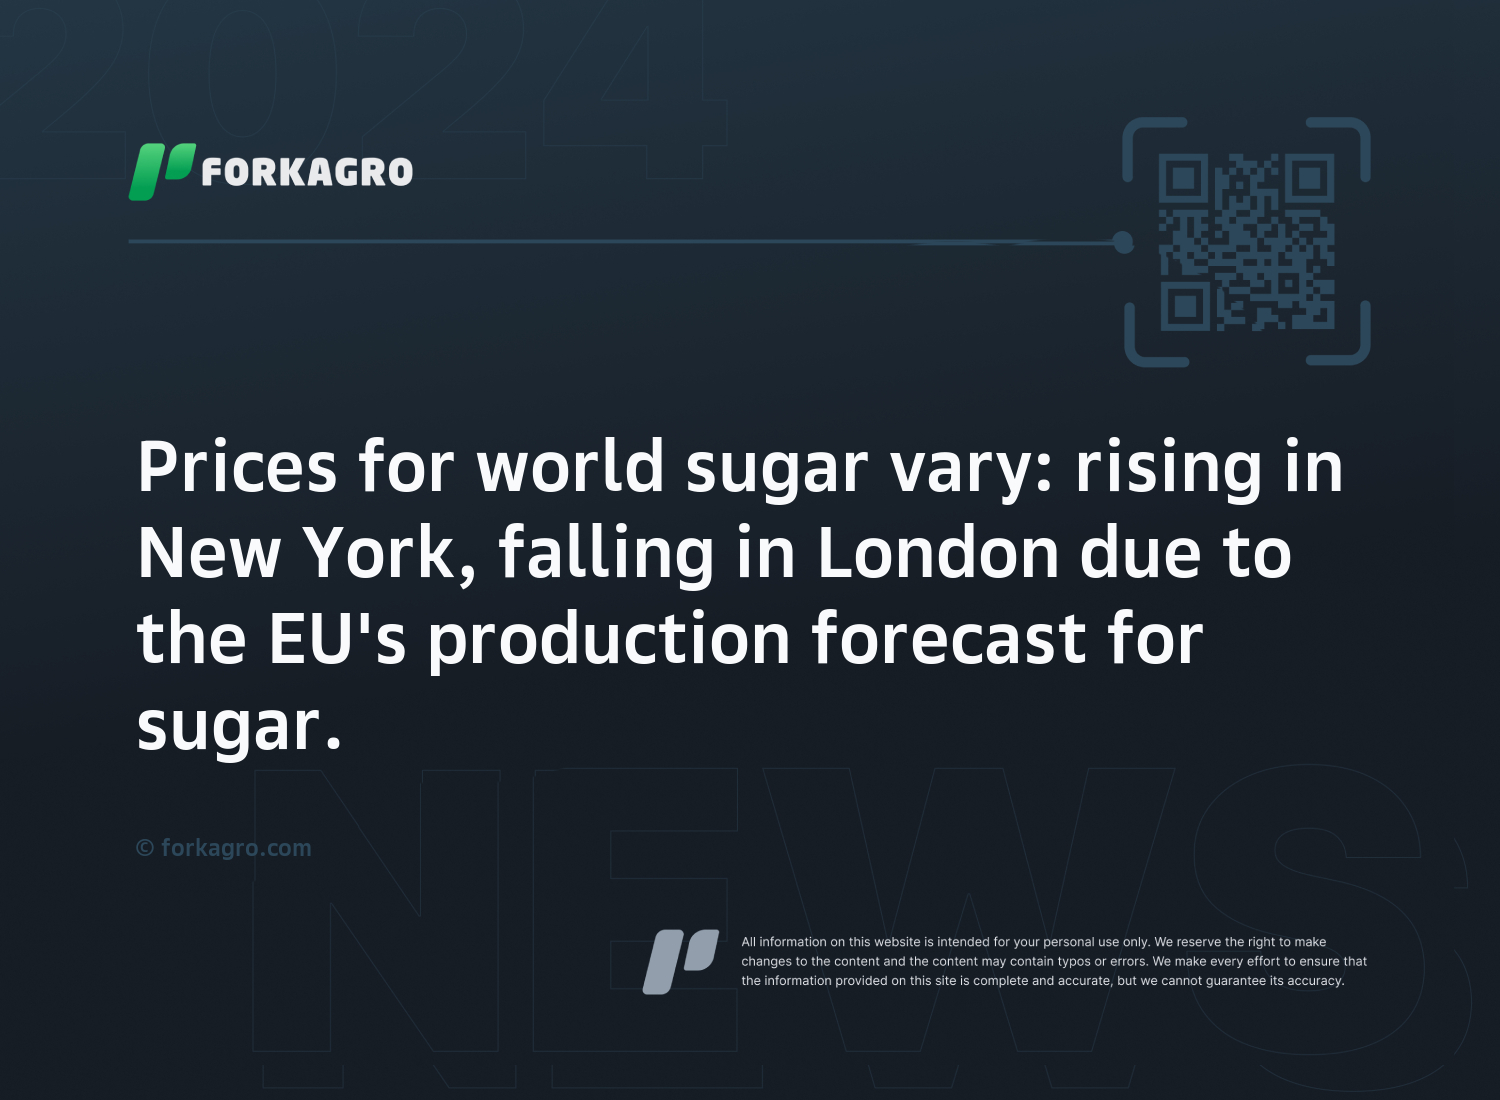 Prices for world sugar vary: rising in New York, falling in London due to the EU's production forecast for sugar.